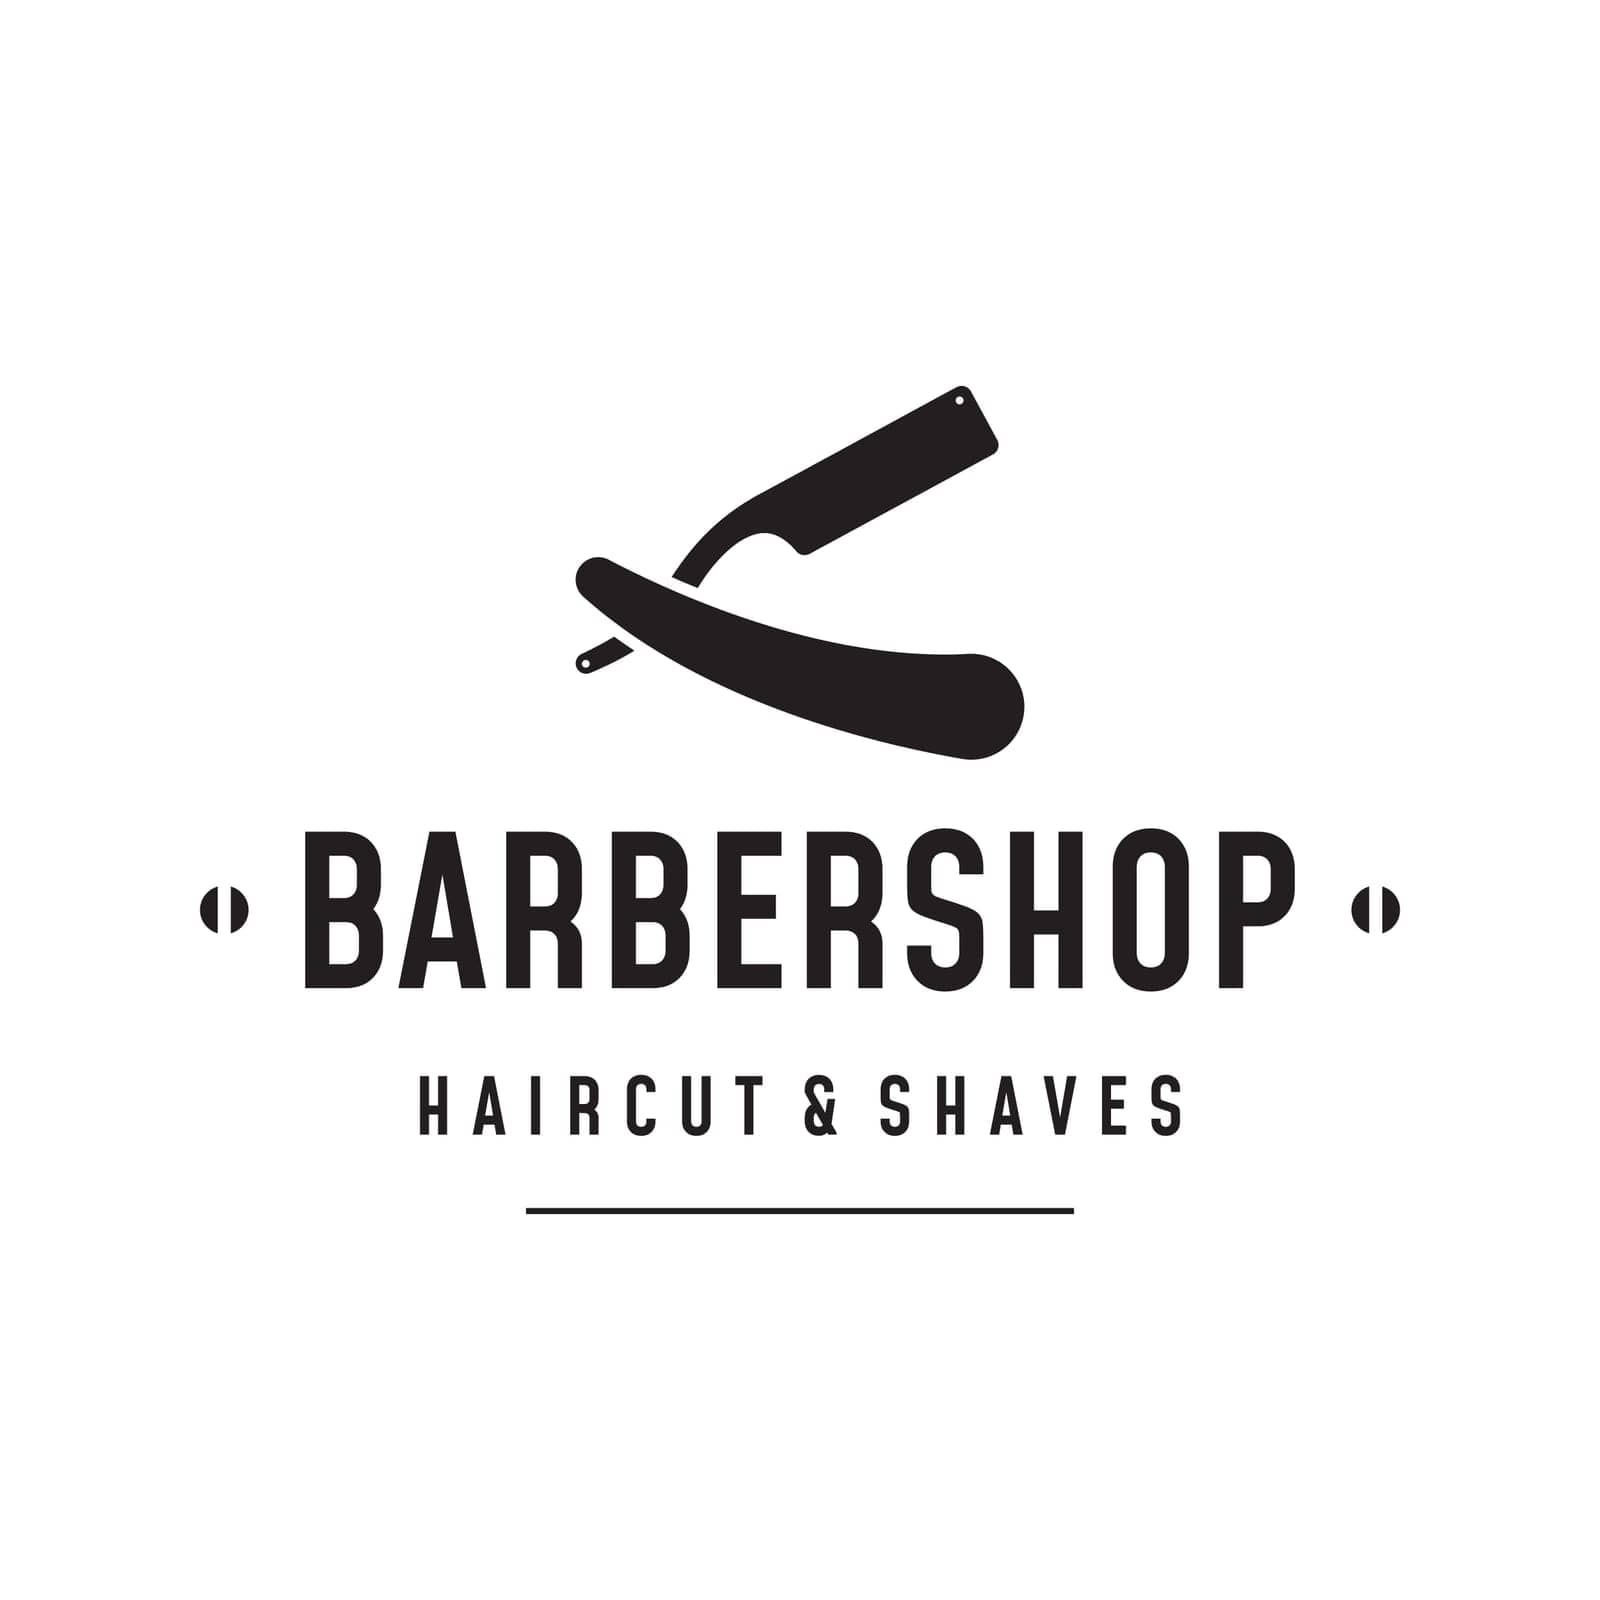 Barbershop logo in vintage style with the concept of scissors, razor and other tools.Logo for business, salon, label and barbershop.